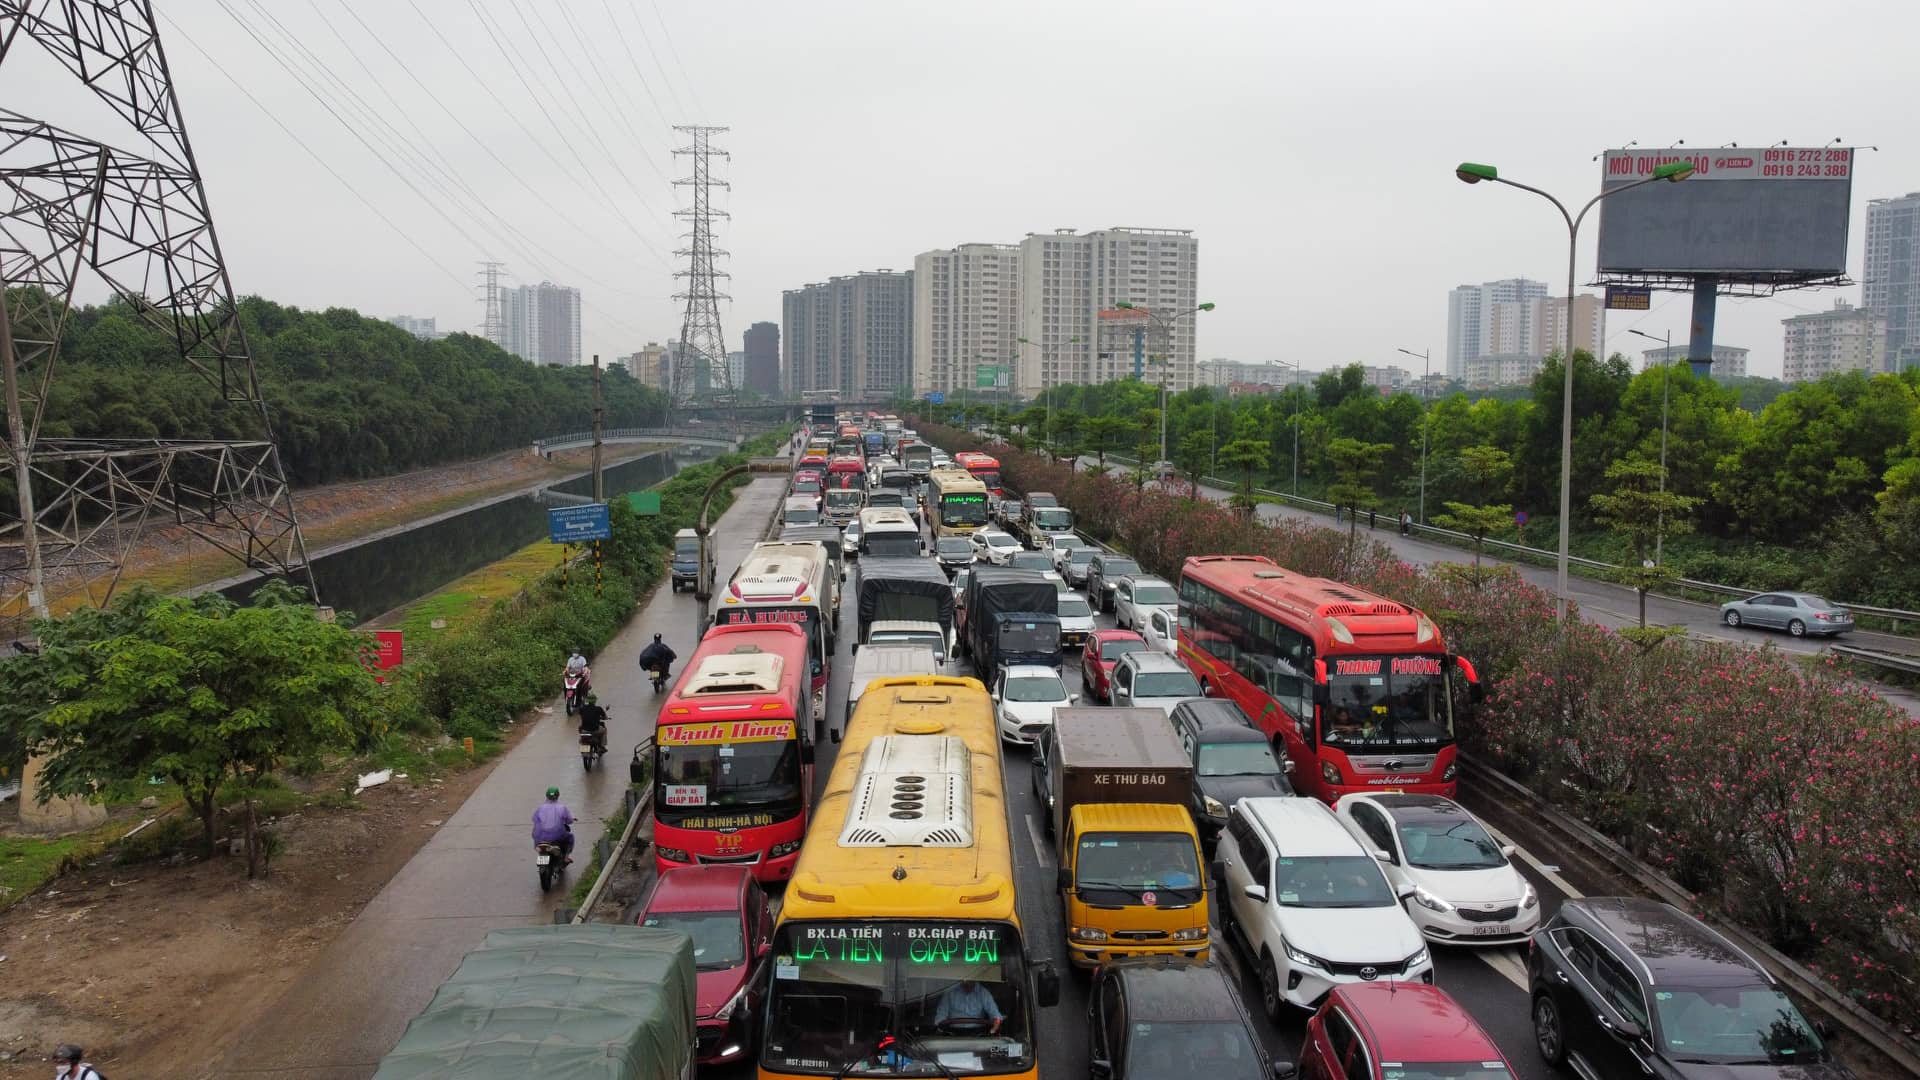 The line of cars followed each other back to their hometown for the holidays of April 30 and May 1, the roads of Hanoi and Ho Chi Minh City were jammed - 21